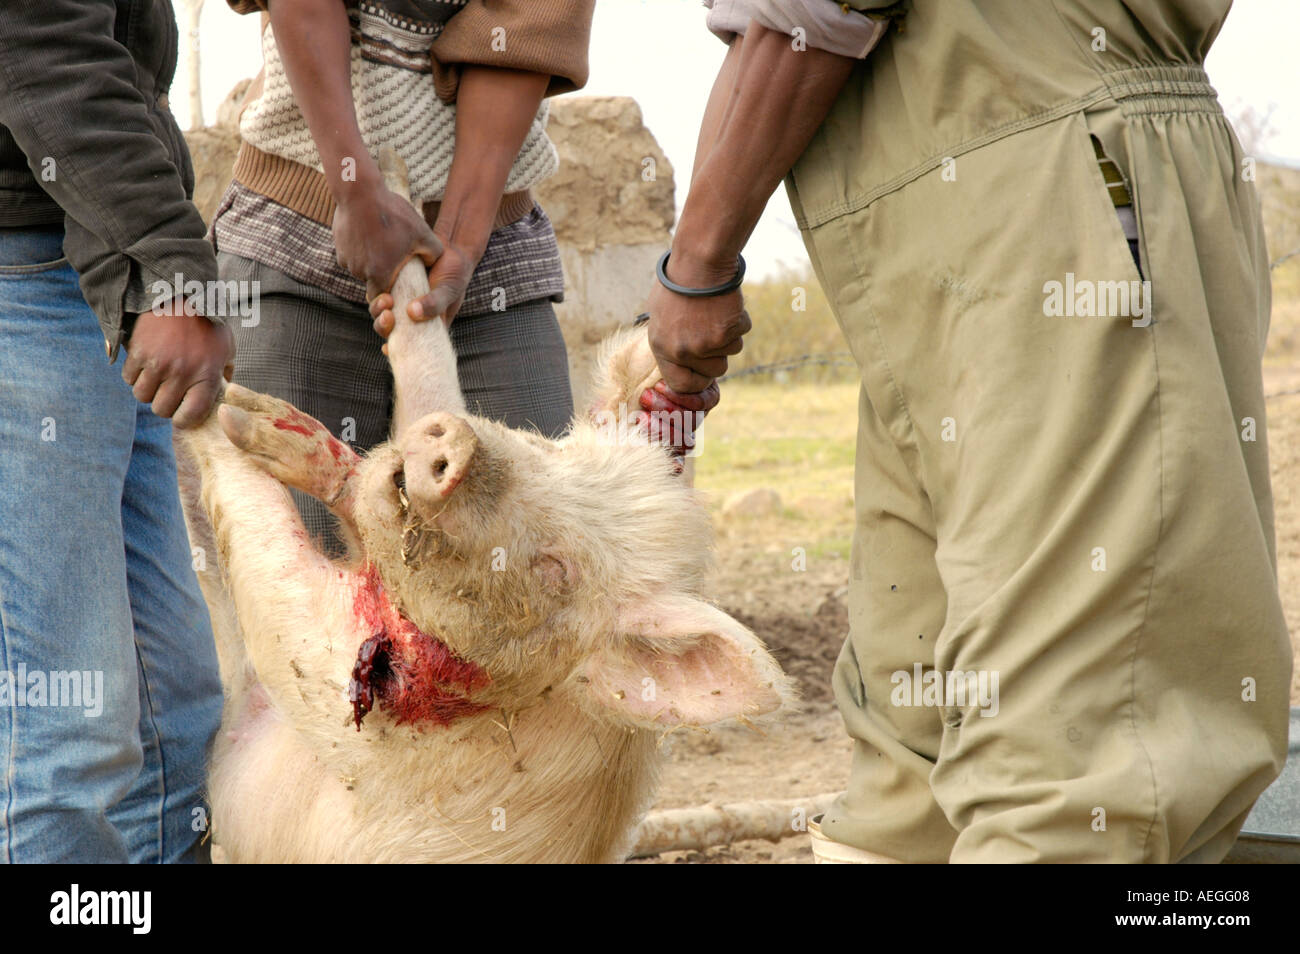 Slaughtering a pig in rural Lesotho Africa Stock Photo